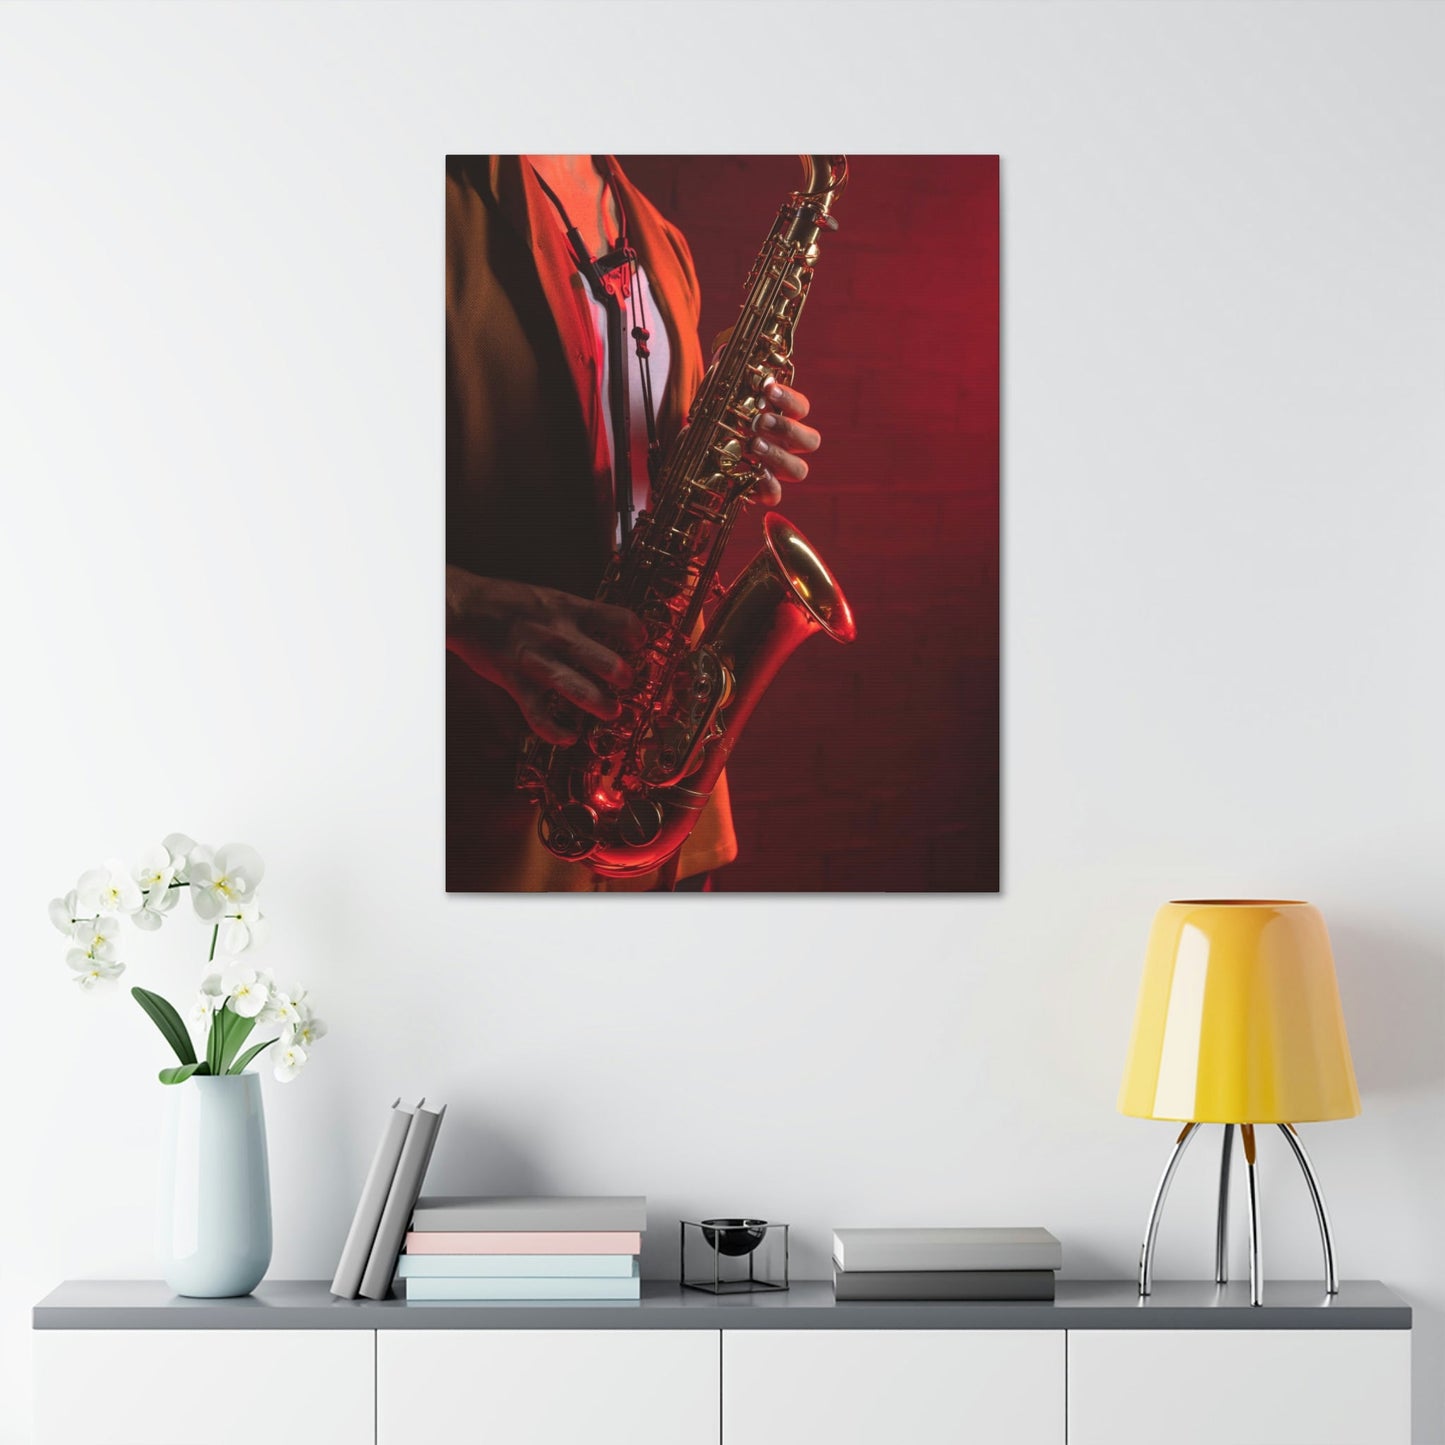 Blues Night: Poster and Print on Canvas with Mood-Setting Music Art